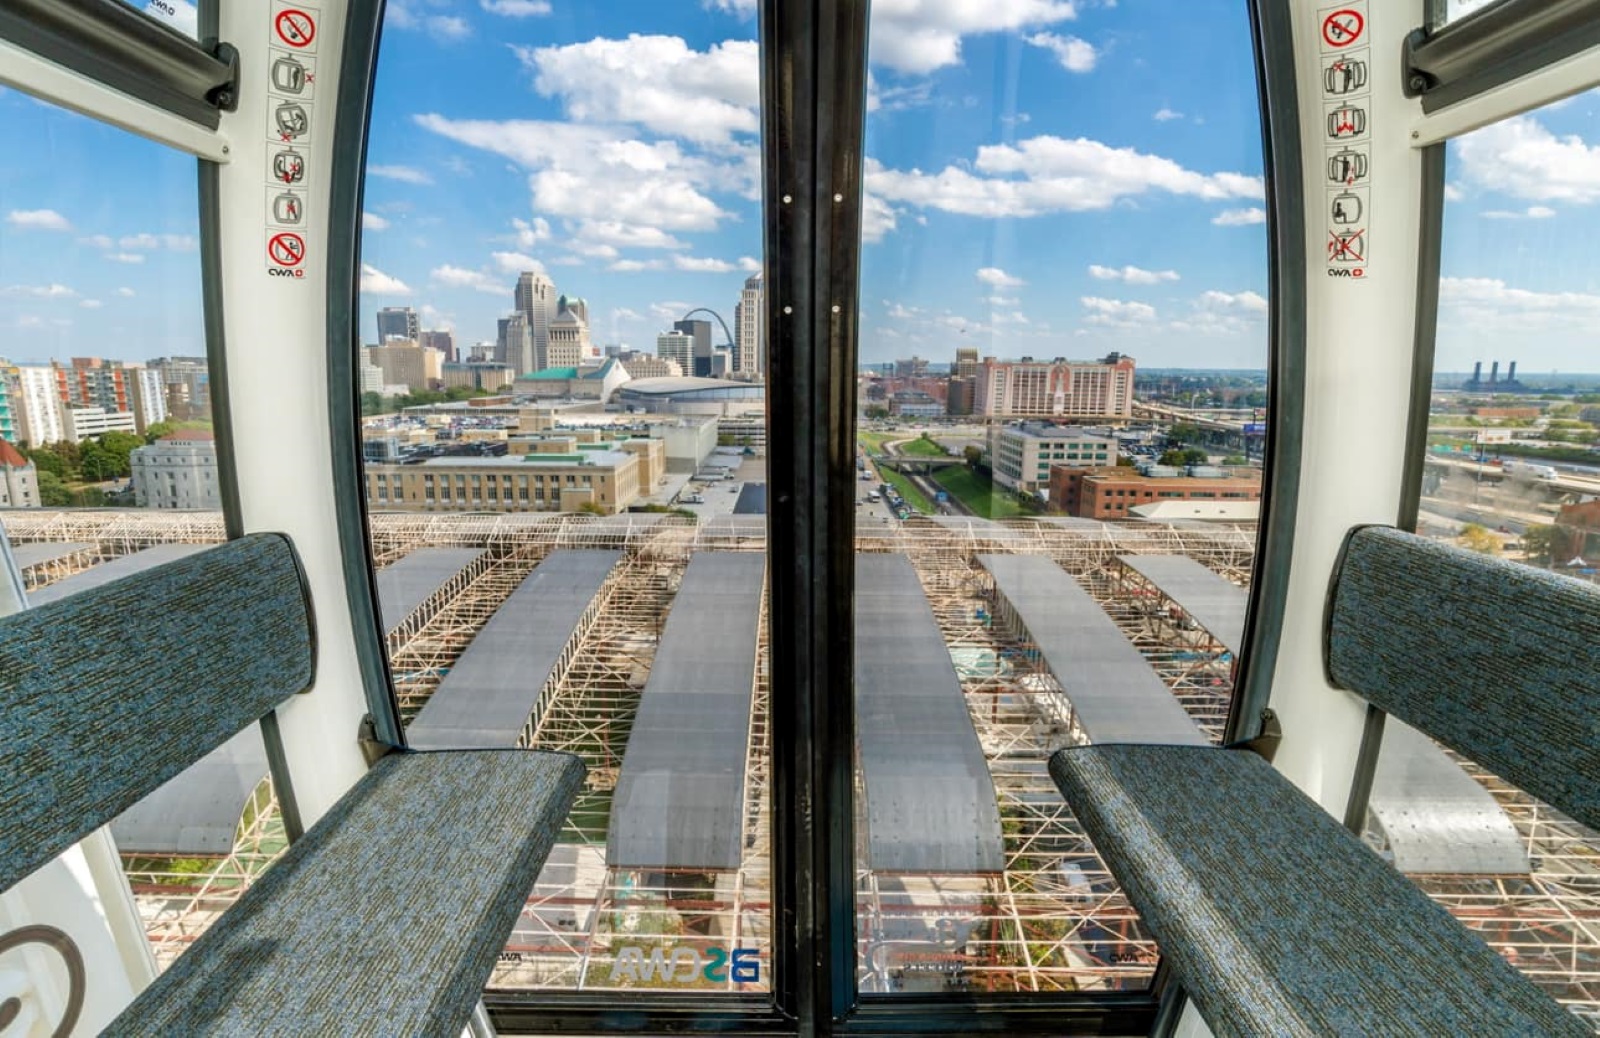 The view from inside the St. Louis Wheel